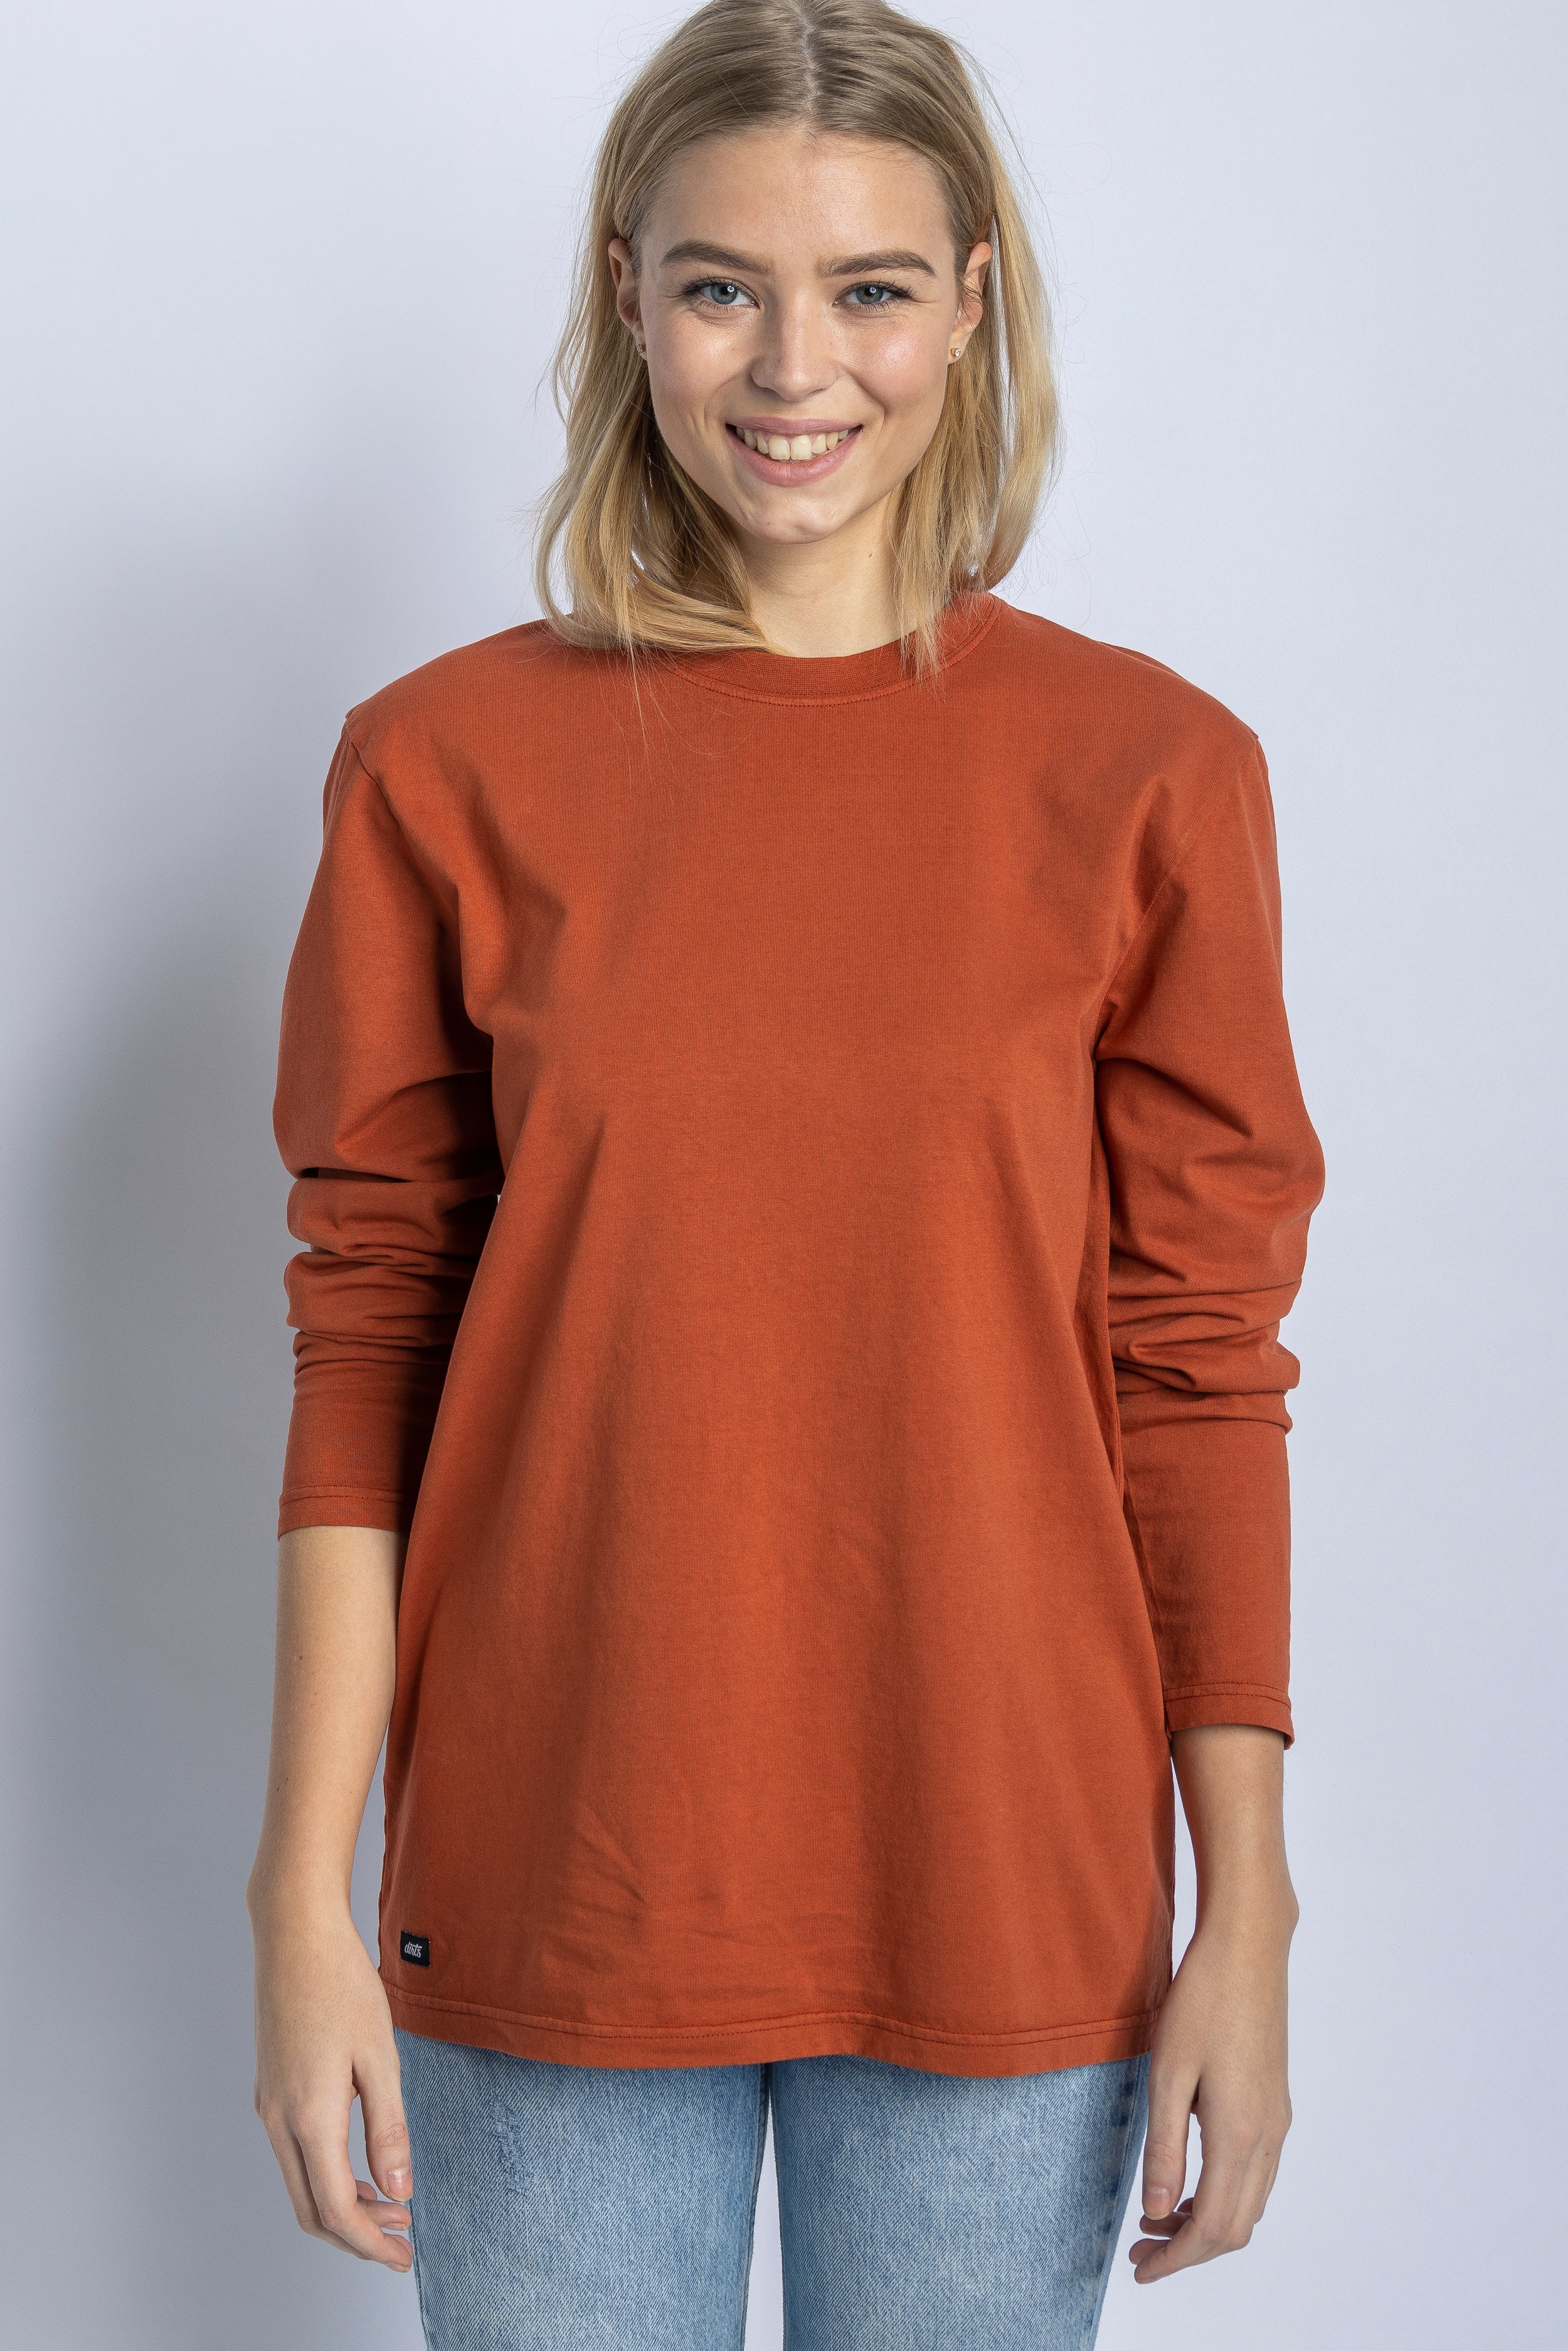 Orange long-sleeved recycled cotton T-shirt from DIRTS